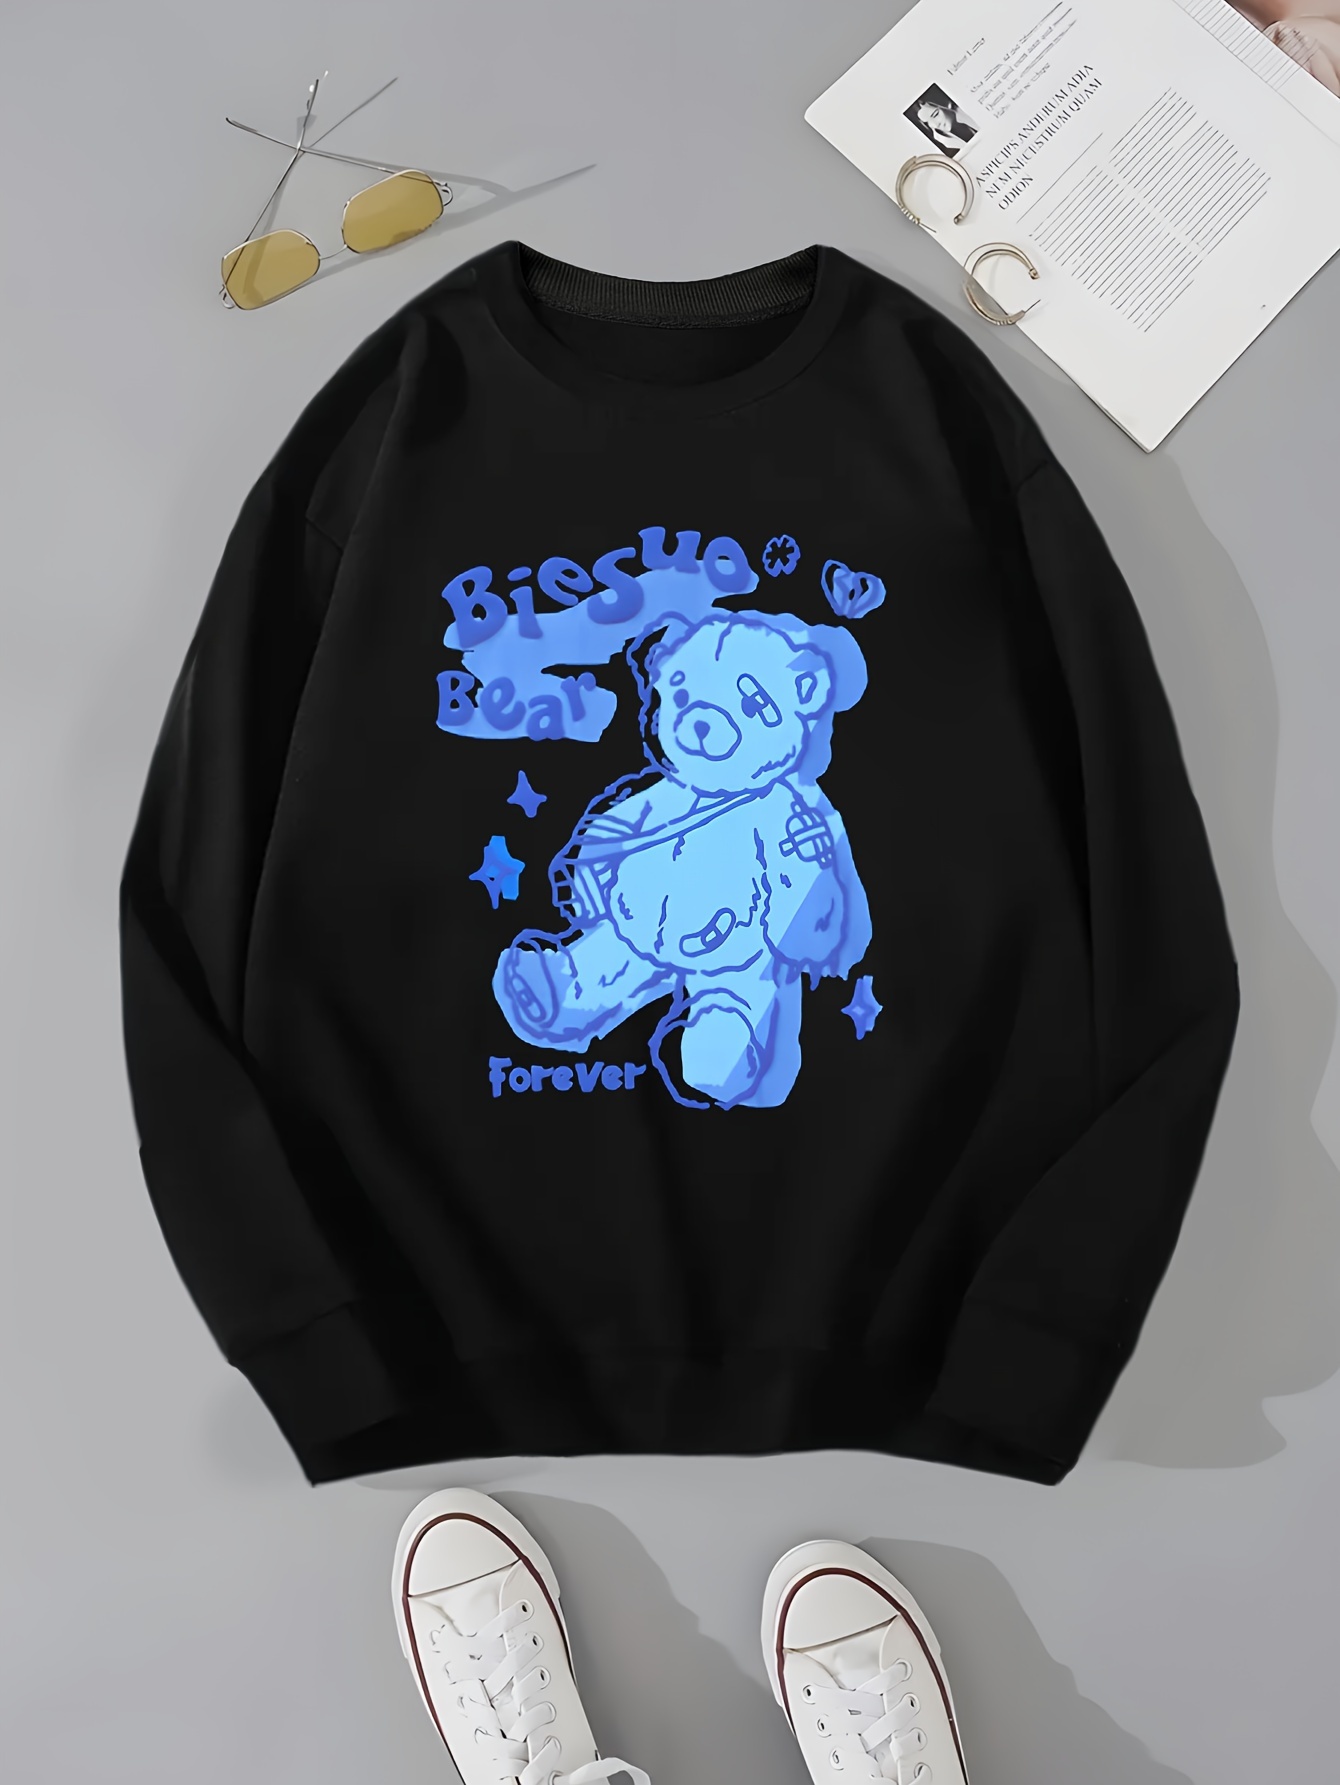 Louis Vuitton Forever Bearbrick Shirt, hoodie, sweater, long sleeve and  tank top